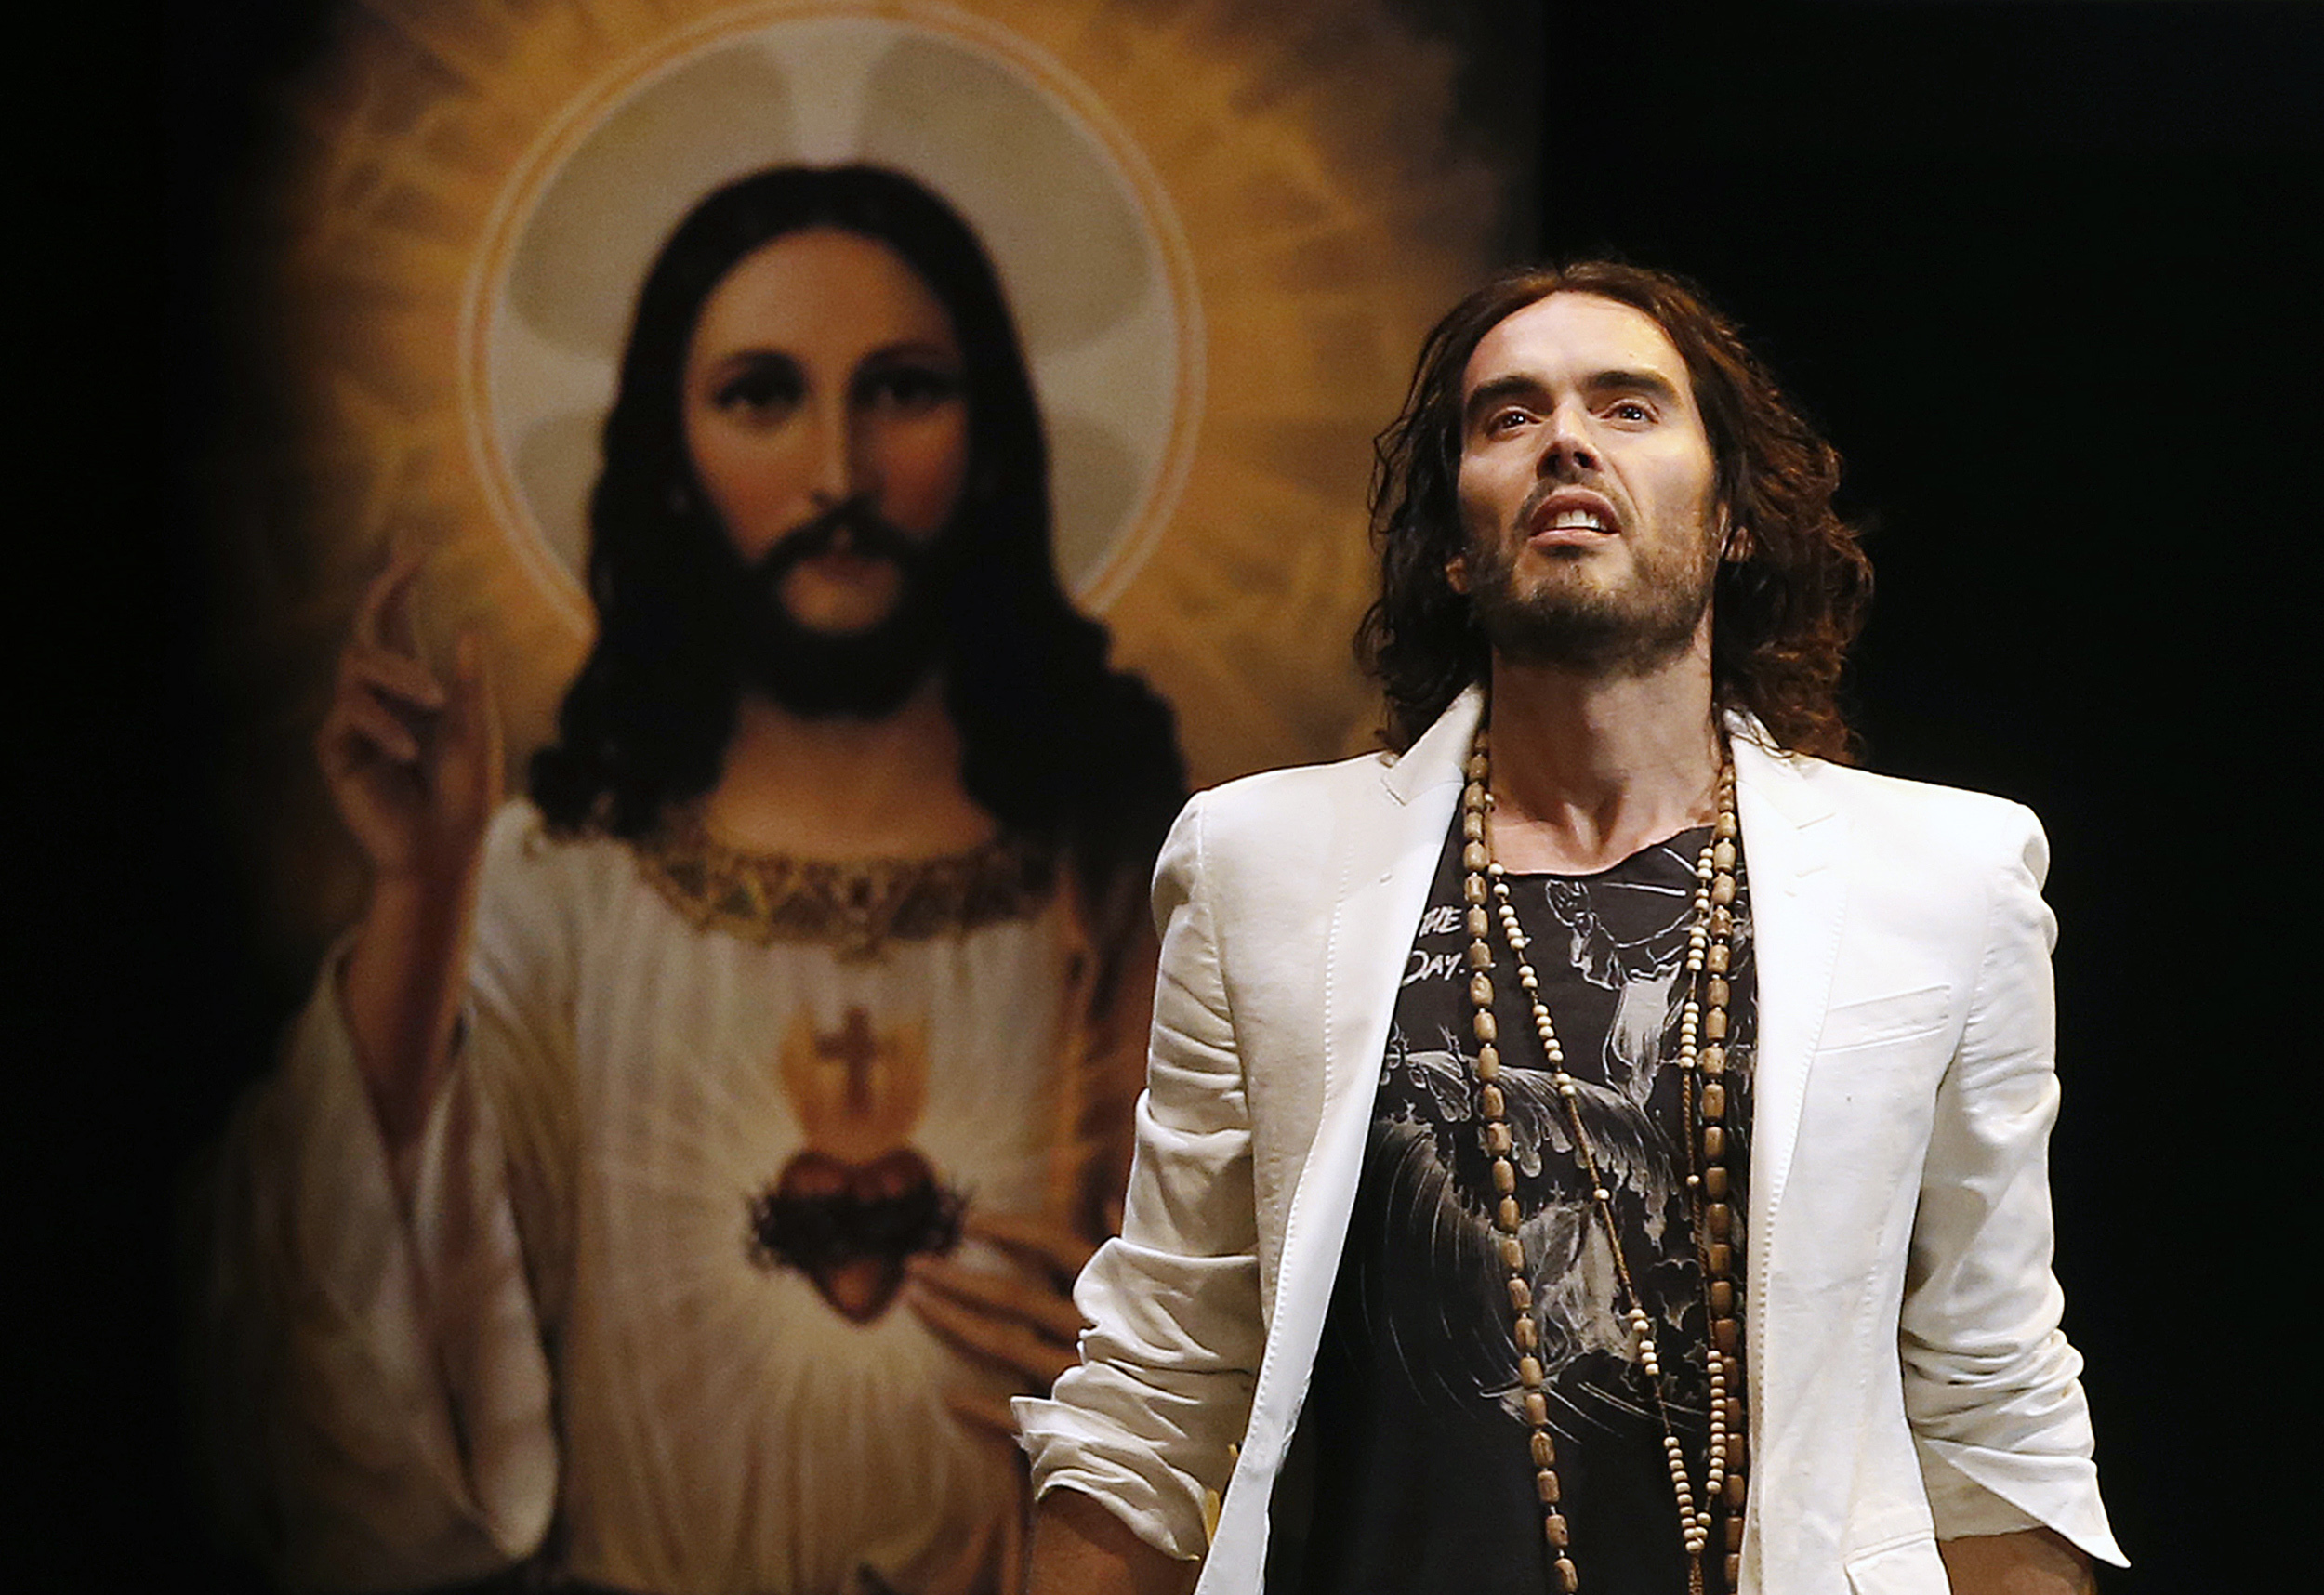 British comedian Russell Brand performs at his Messiah Complex show at Brixton Academy in London March 9, 2014. REUTERS/Olivia Harris (BRITAIN - Tags: ENTERTAINMENT)